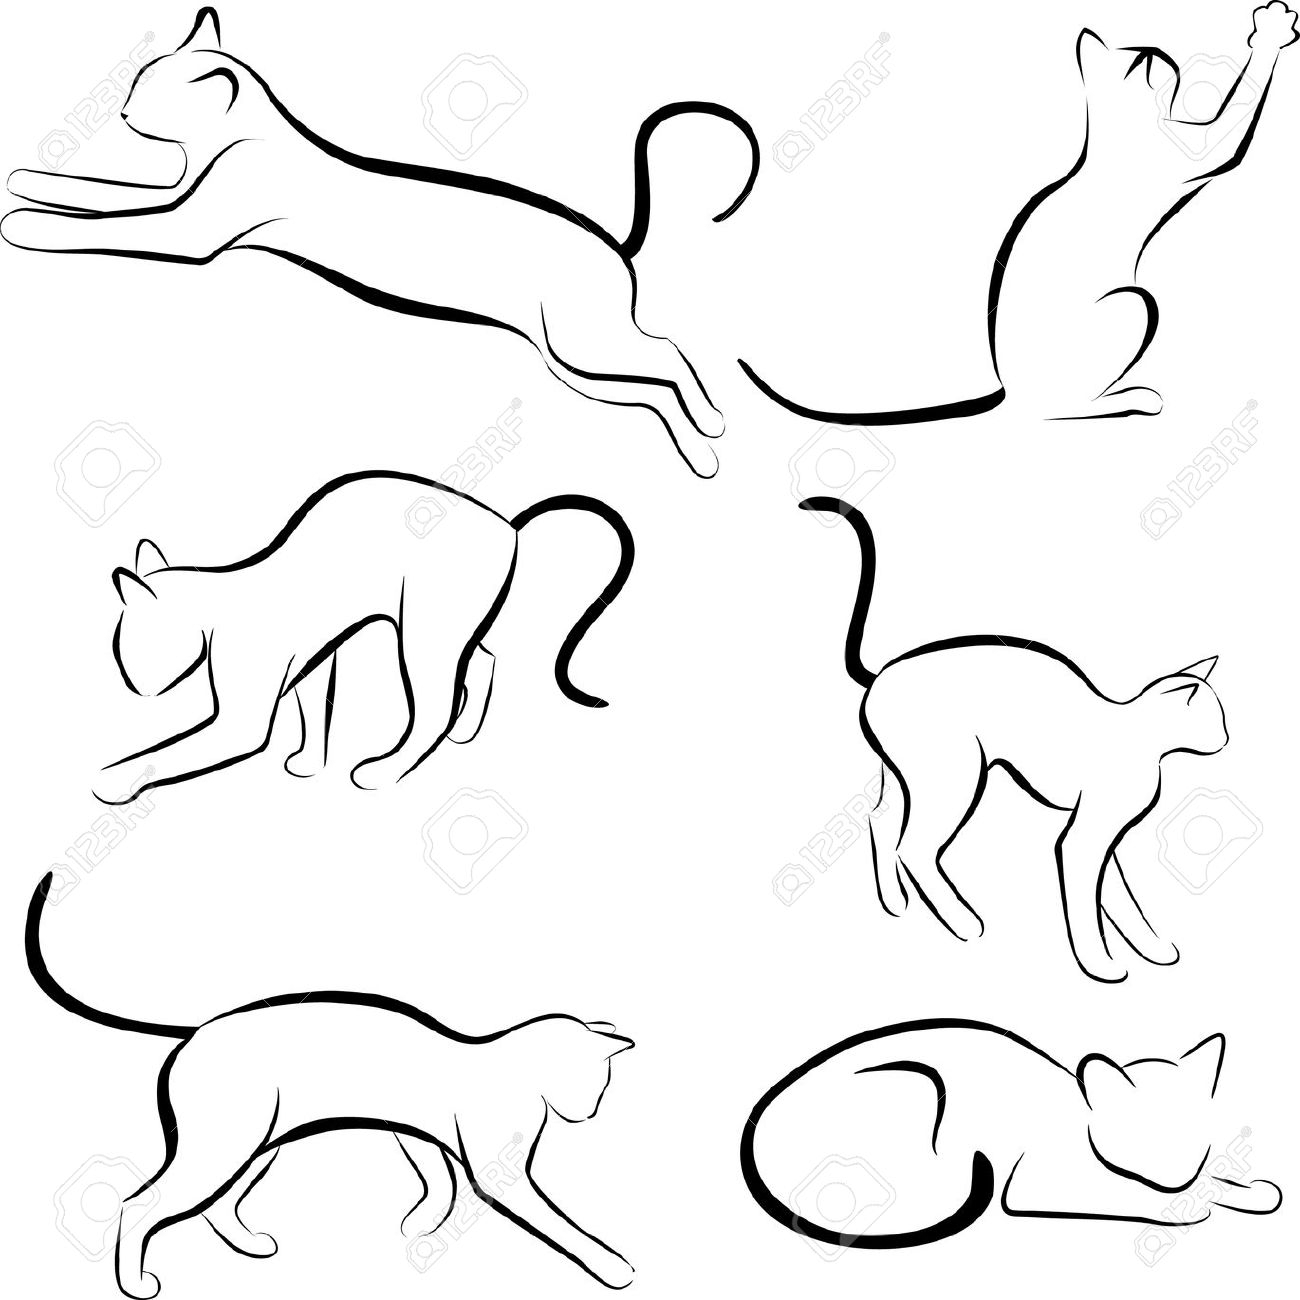 Simple Cat Line Drawing | Free download on ClipArtMag